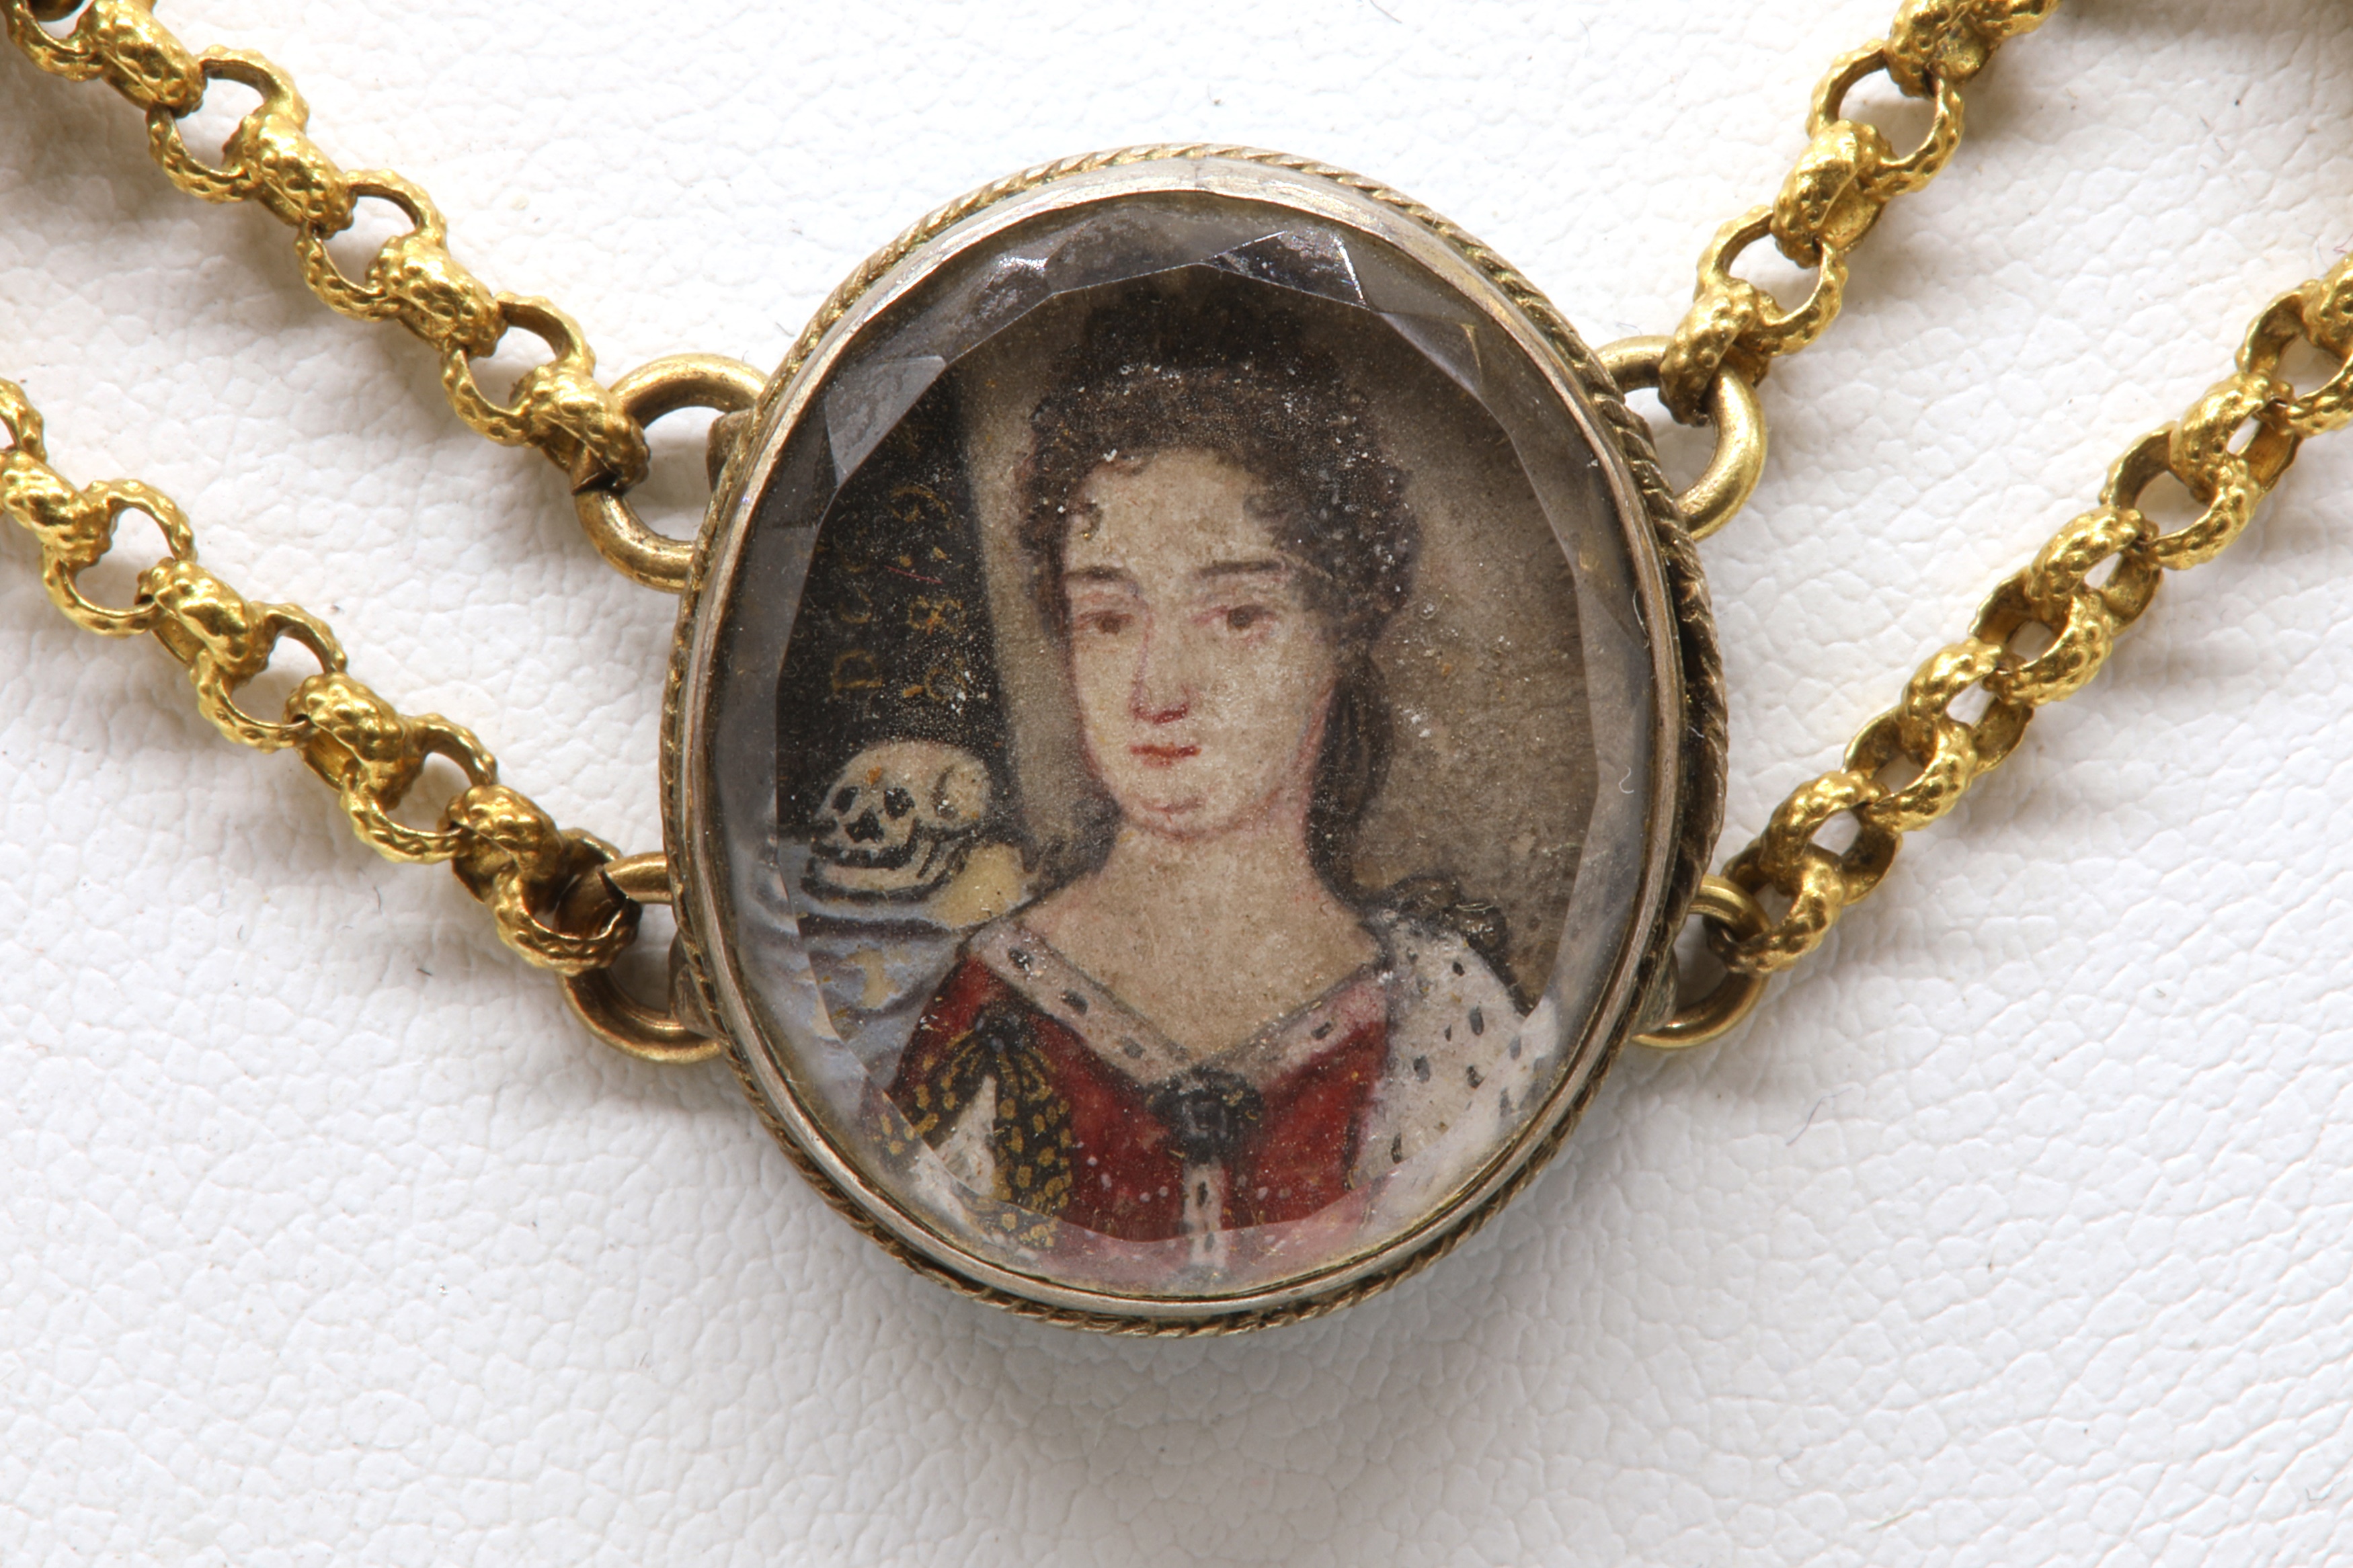 Discoveries 2: Our Best Jewellery Find - A Rare 17th-18th century Moroccan  Enamelled Gold Necklace - Michael Backman Ltd